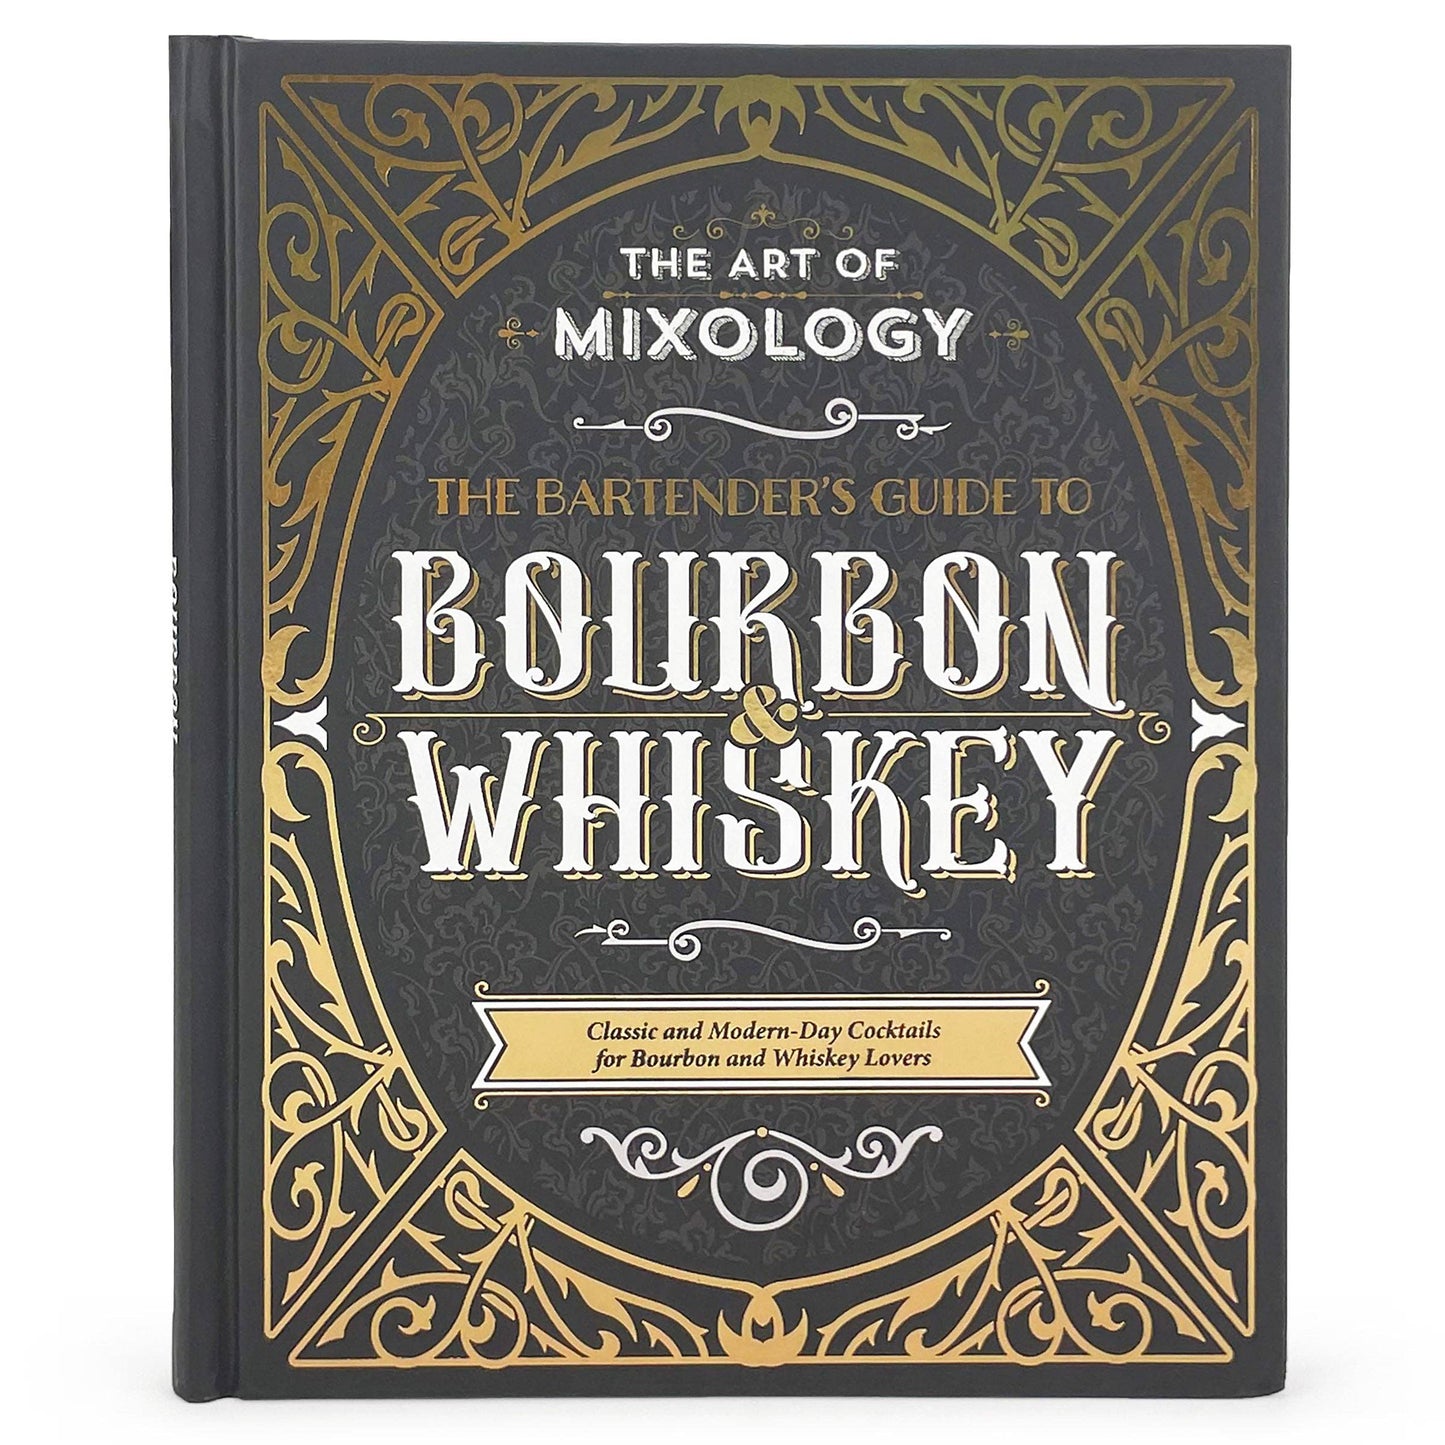 The Art of Mixology: Bartender's Guide to Bourbon & Whiskey